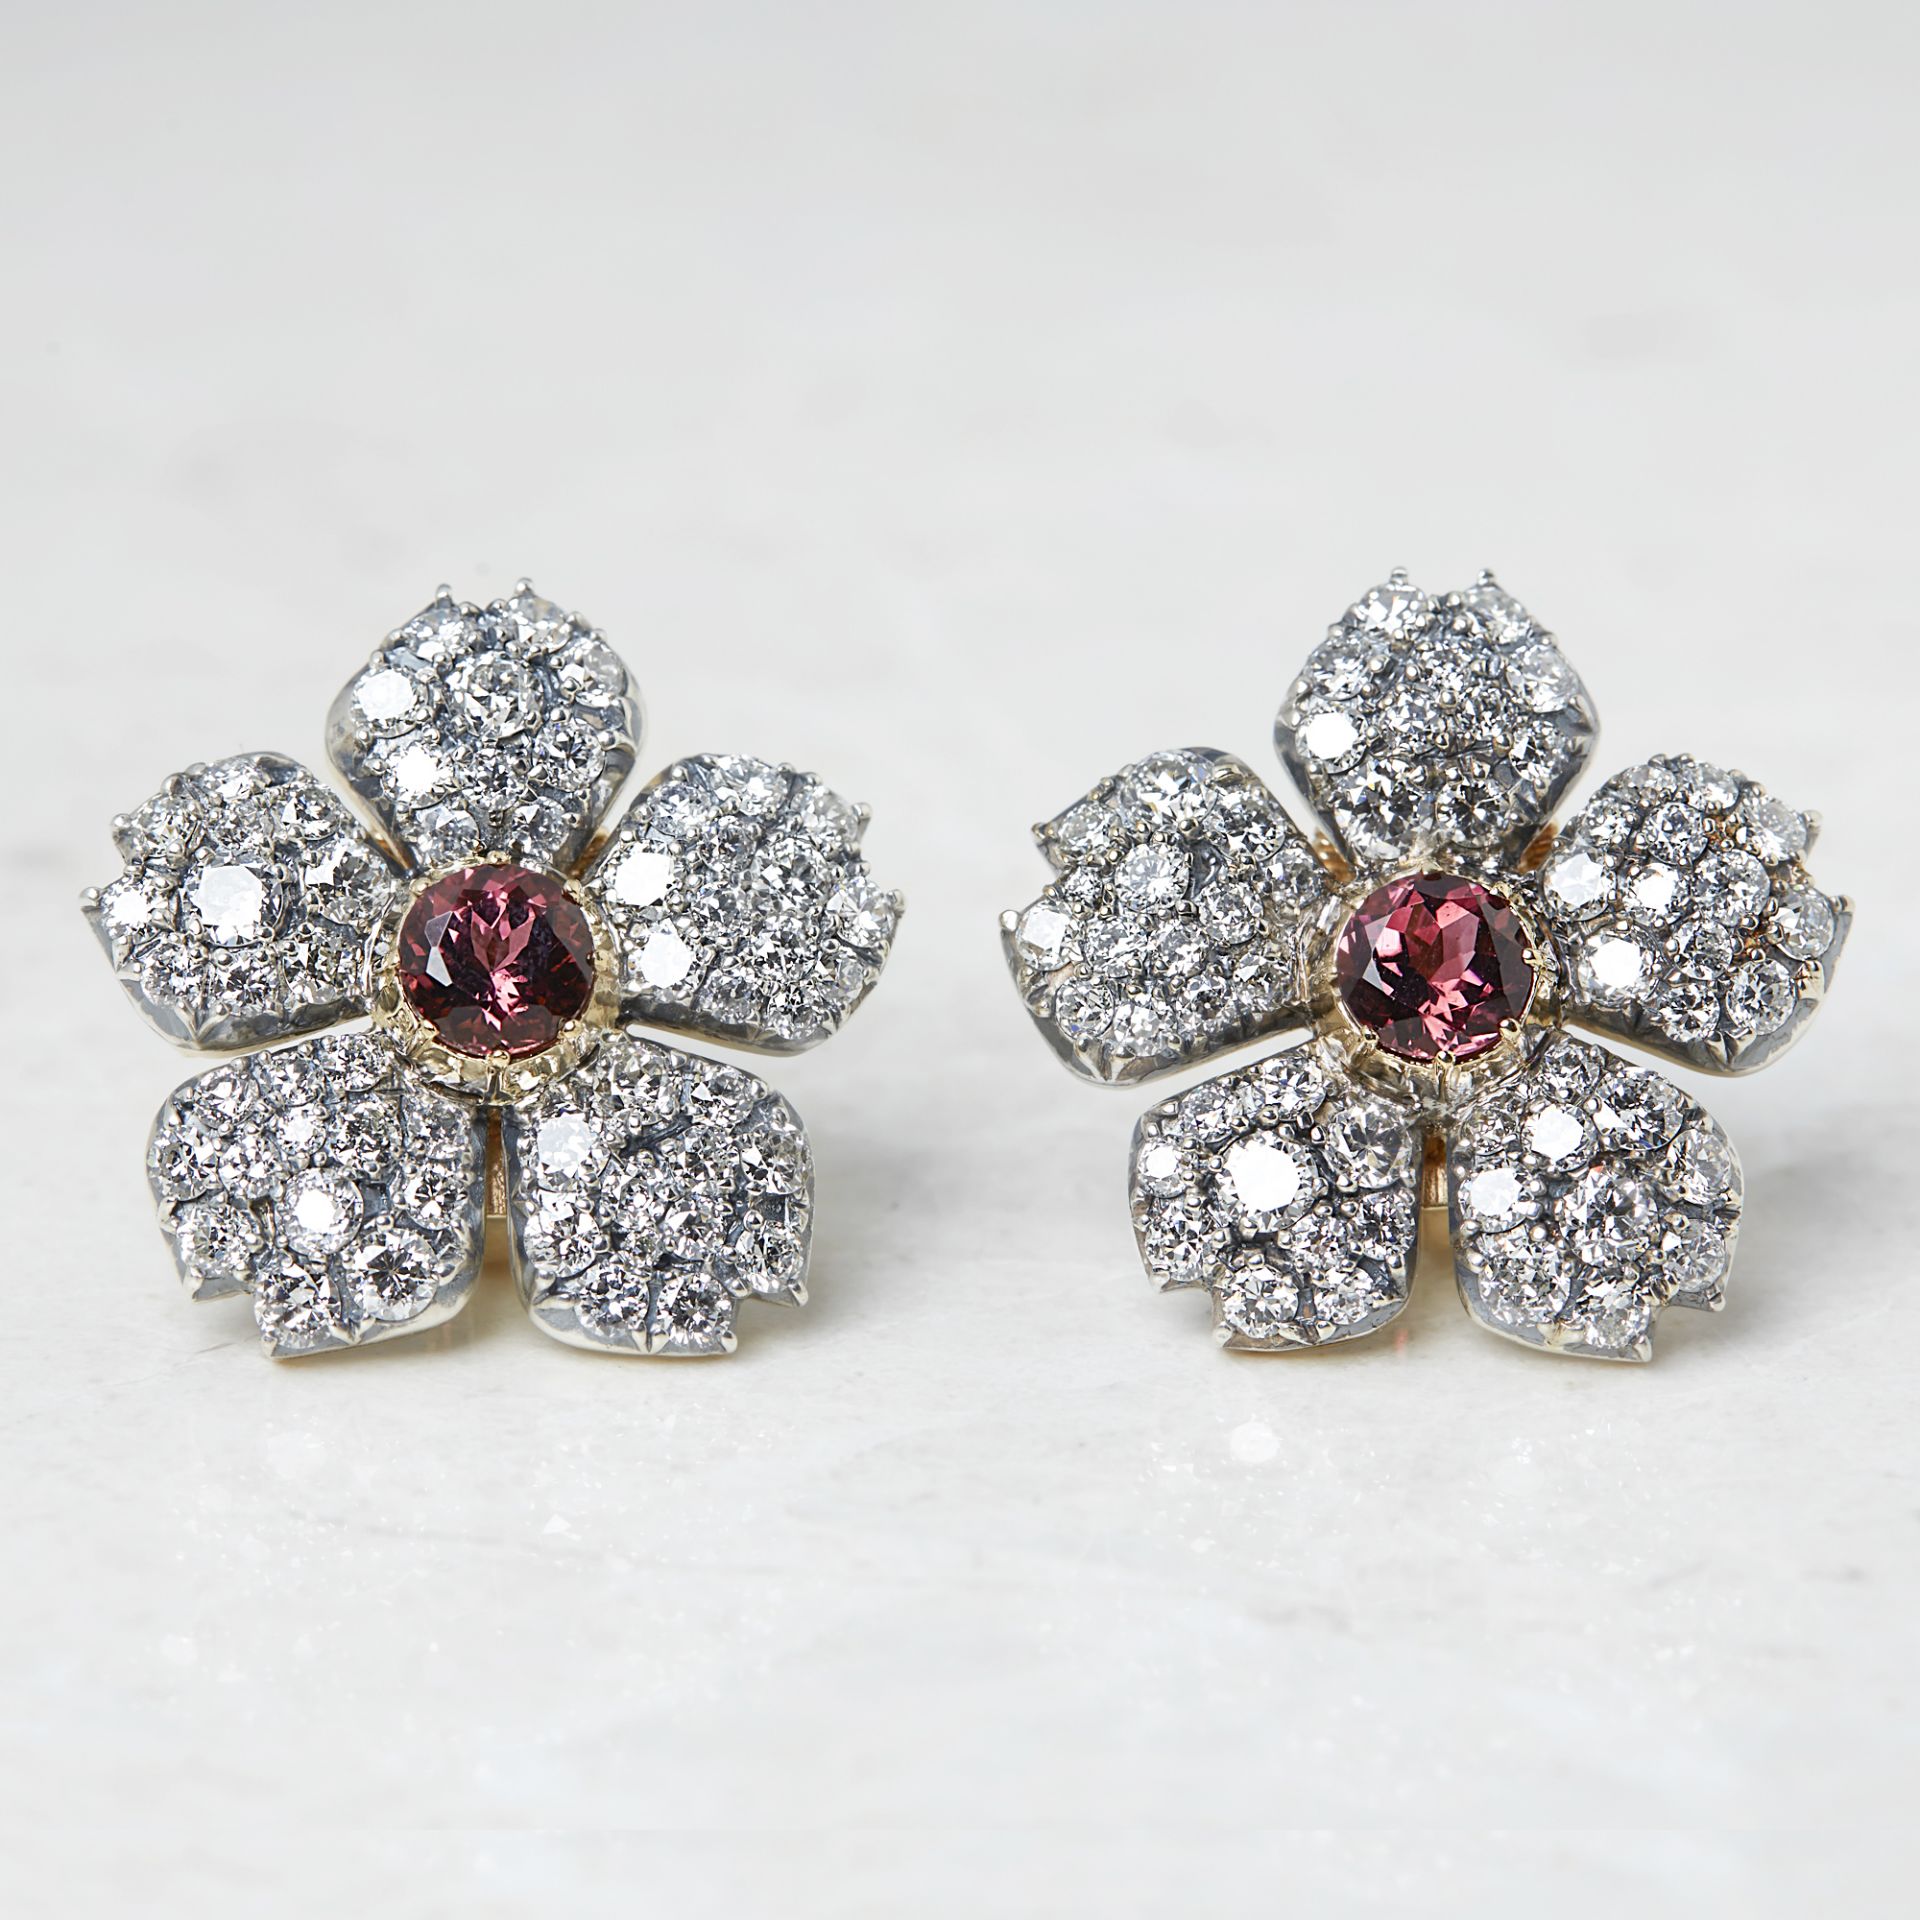 Cartier 18k White Gold 3.07ct Pink Tourmaline & 5.10ct Diamond Flower Earrings with Cartier Box